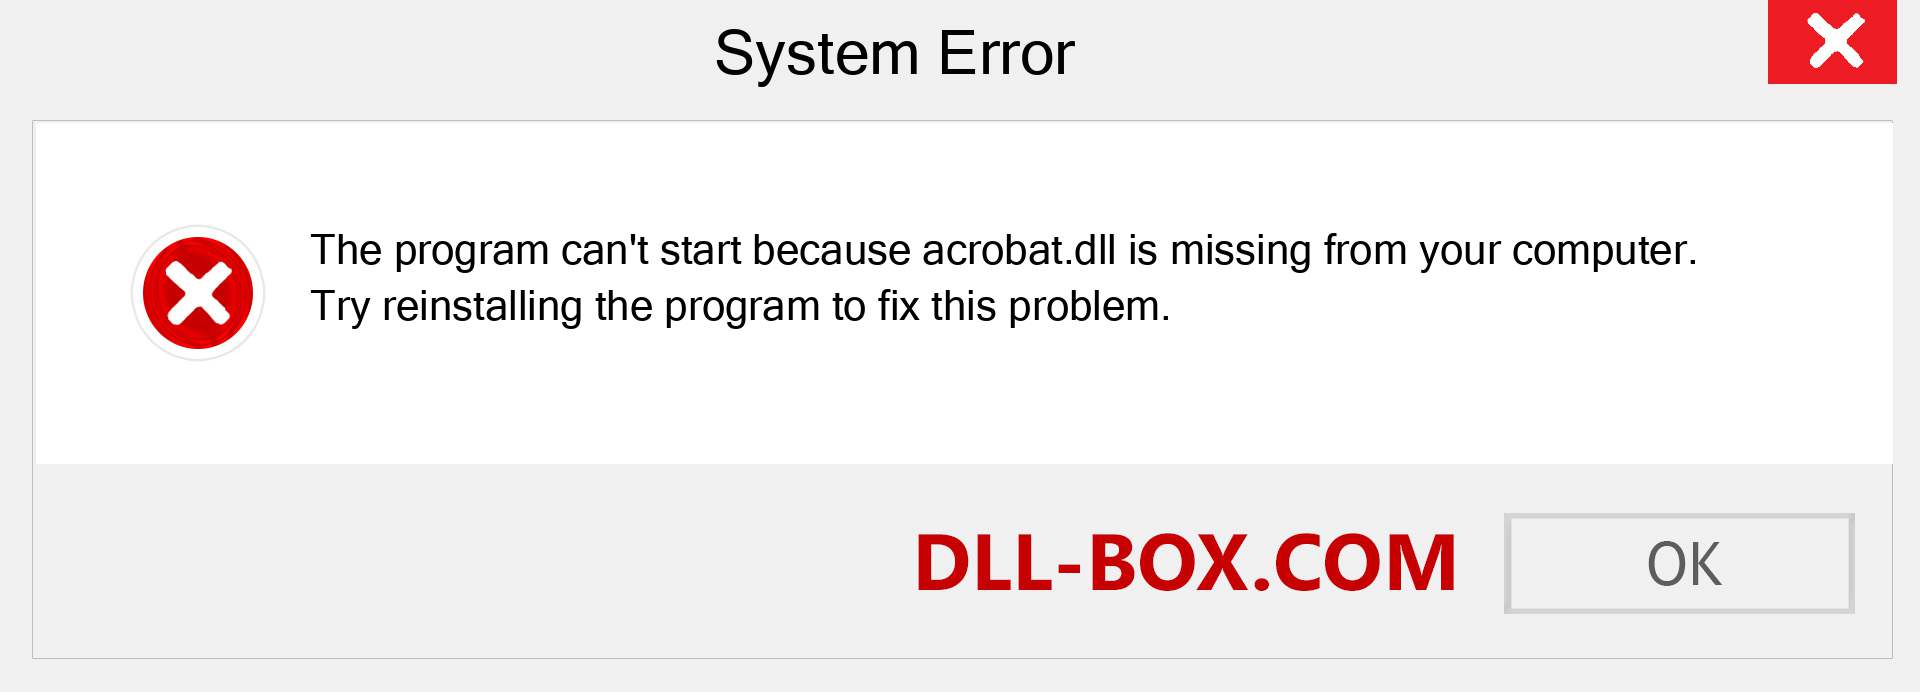  acrobat.dll file is missing?. Download for Windows 7, 8, 10 - Fix  acrobat dll Missing Error on Windows, photos, images